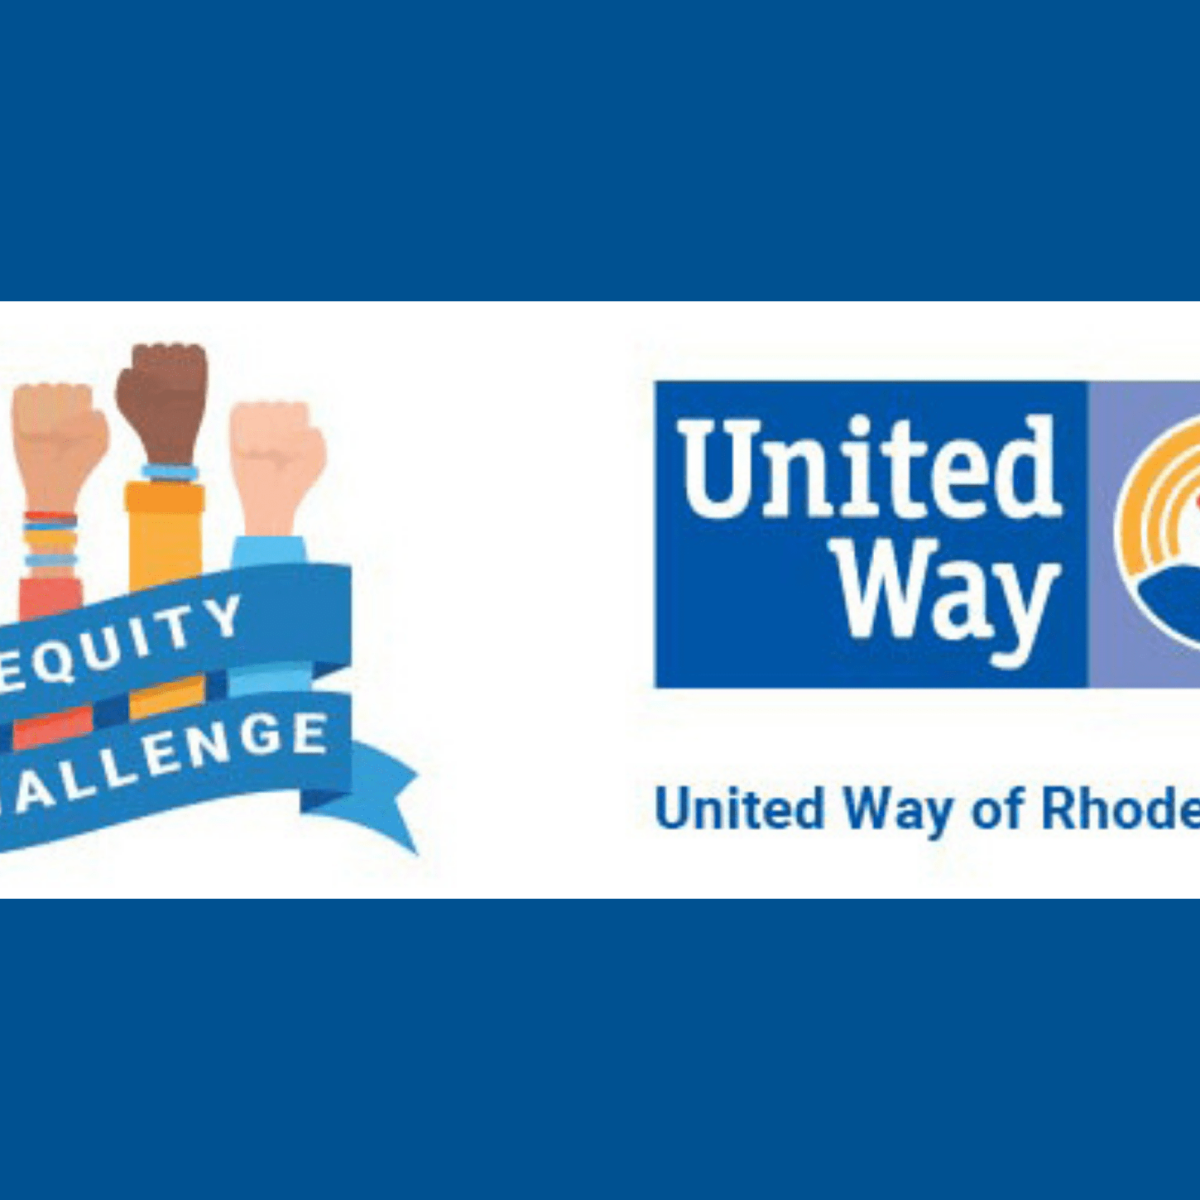 Co-branded logos: Equity Challenge (left) and United Way of Rhode Island (right).